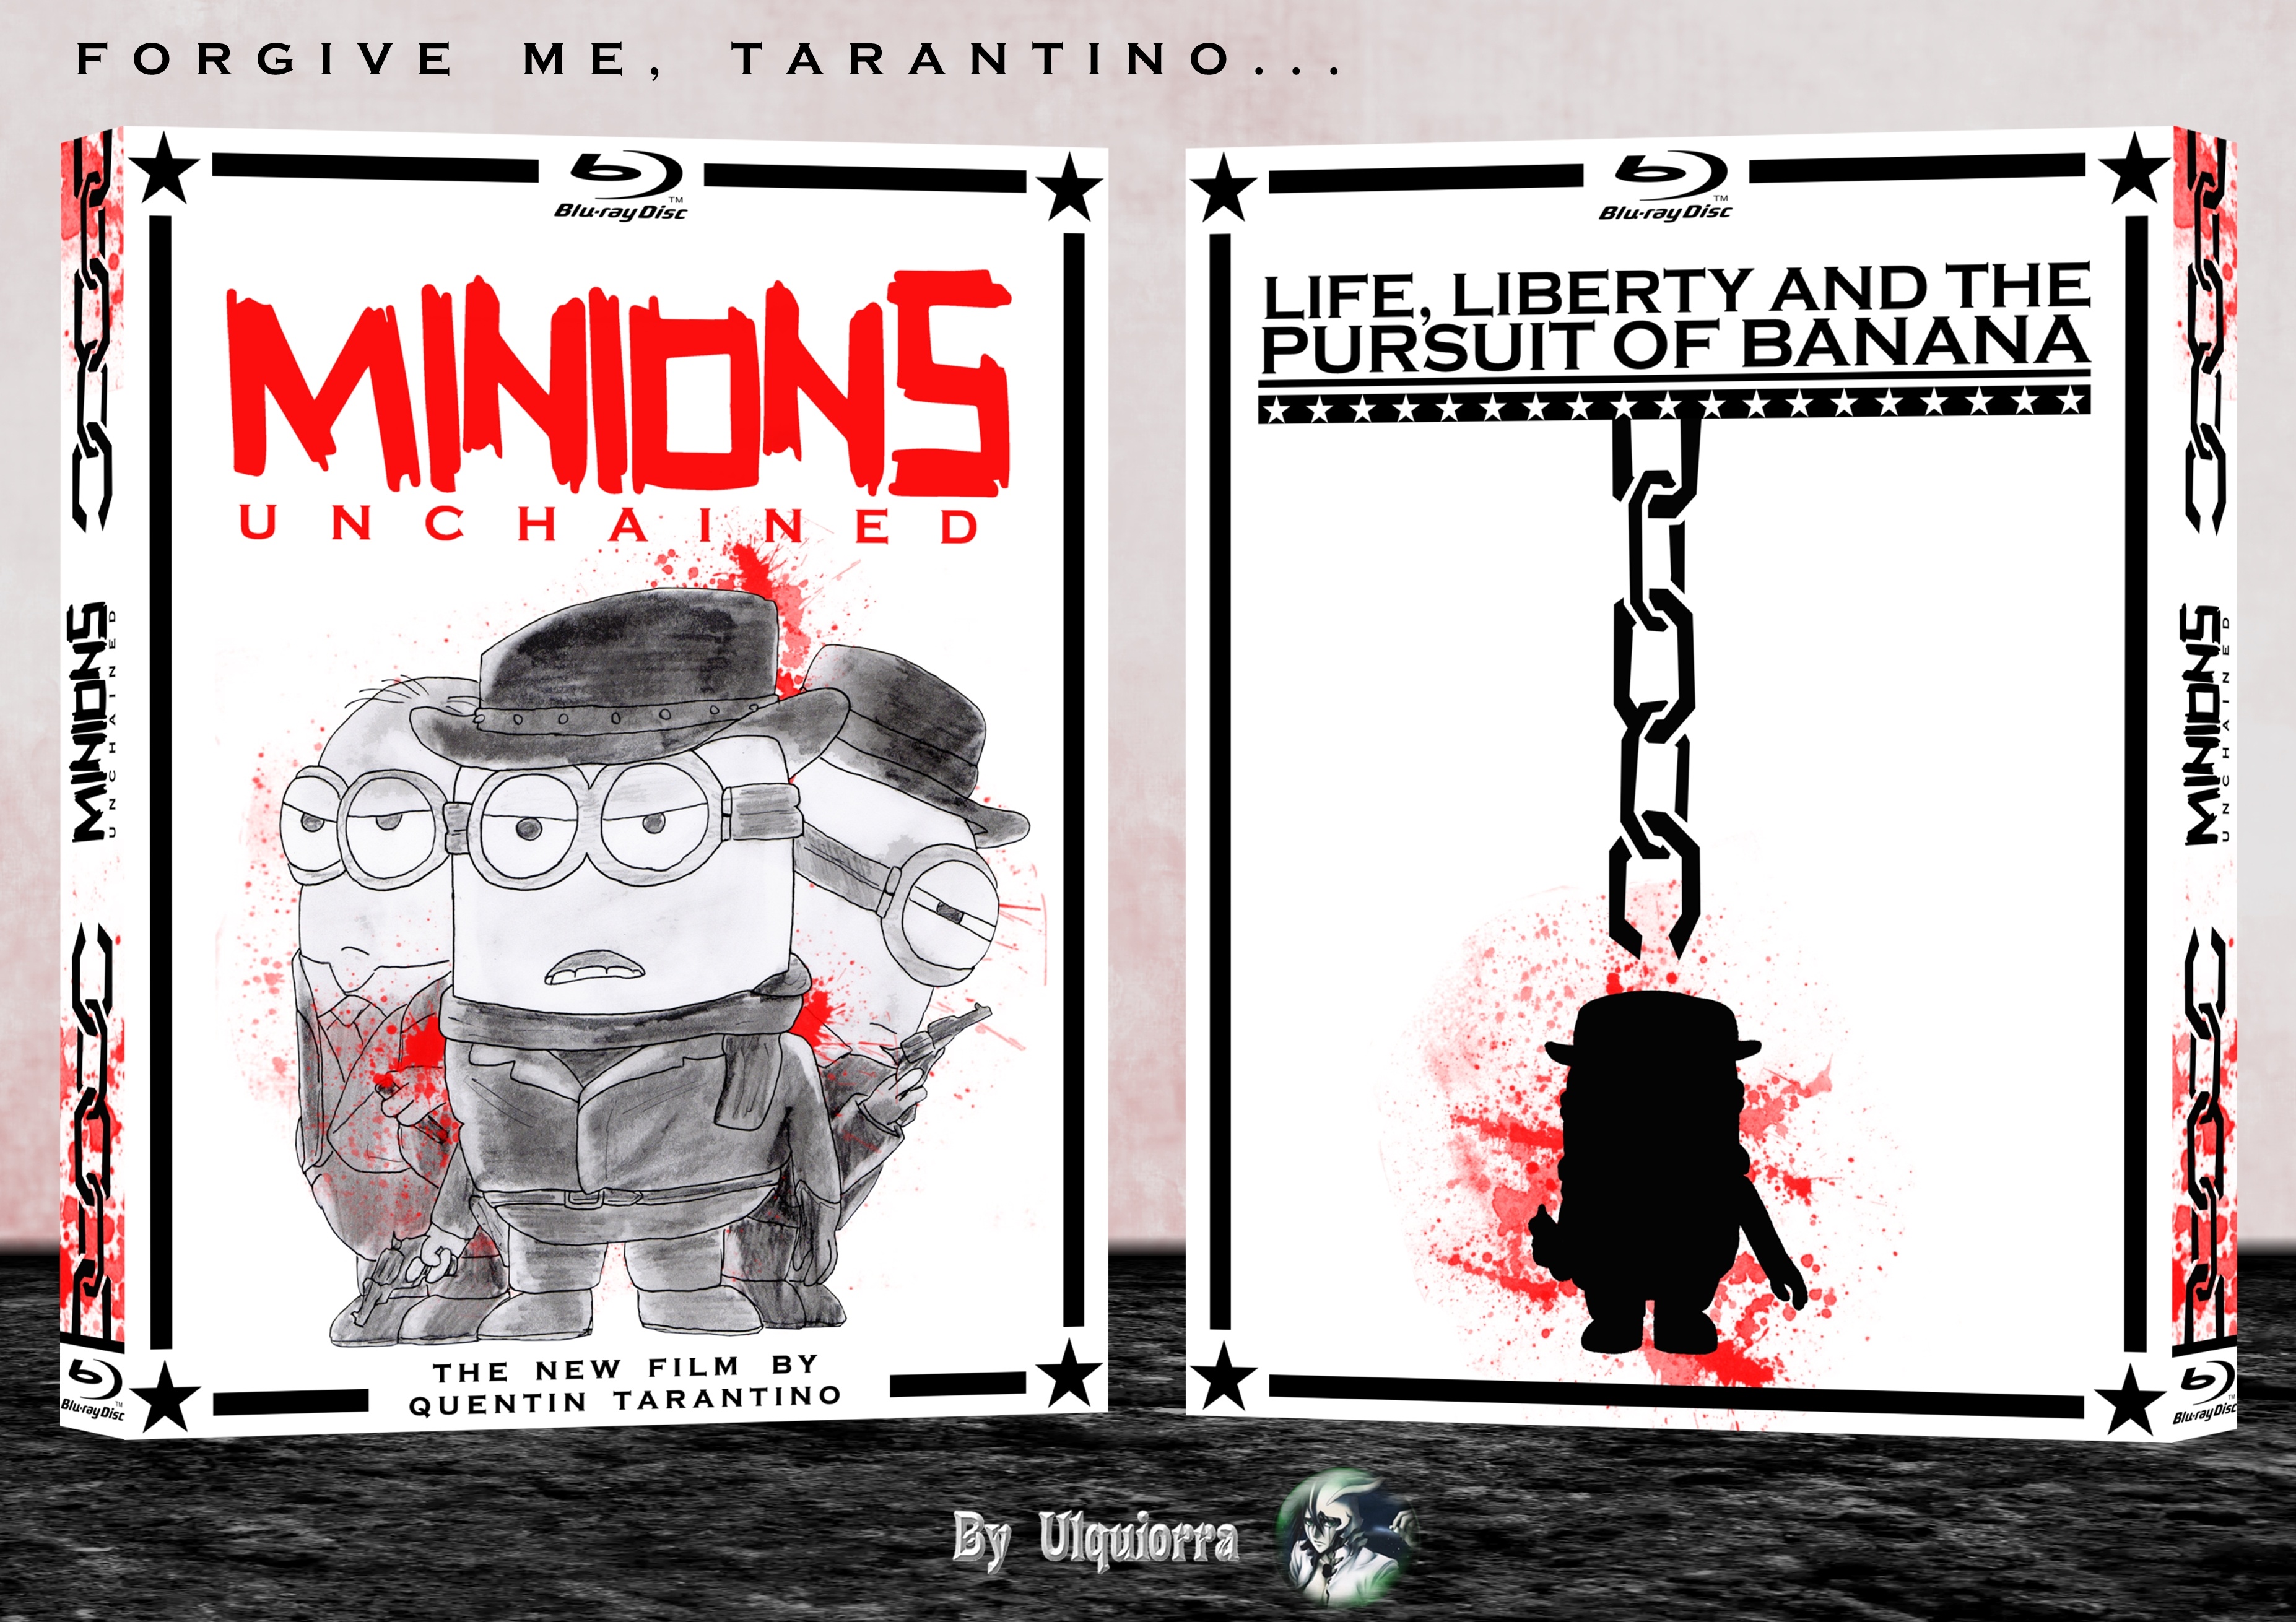 Minions Unchained box cover